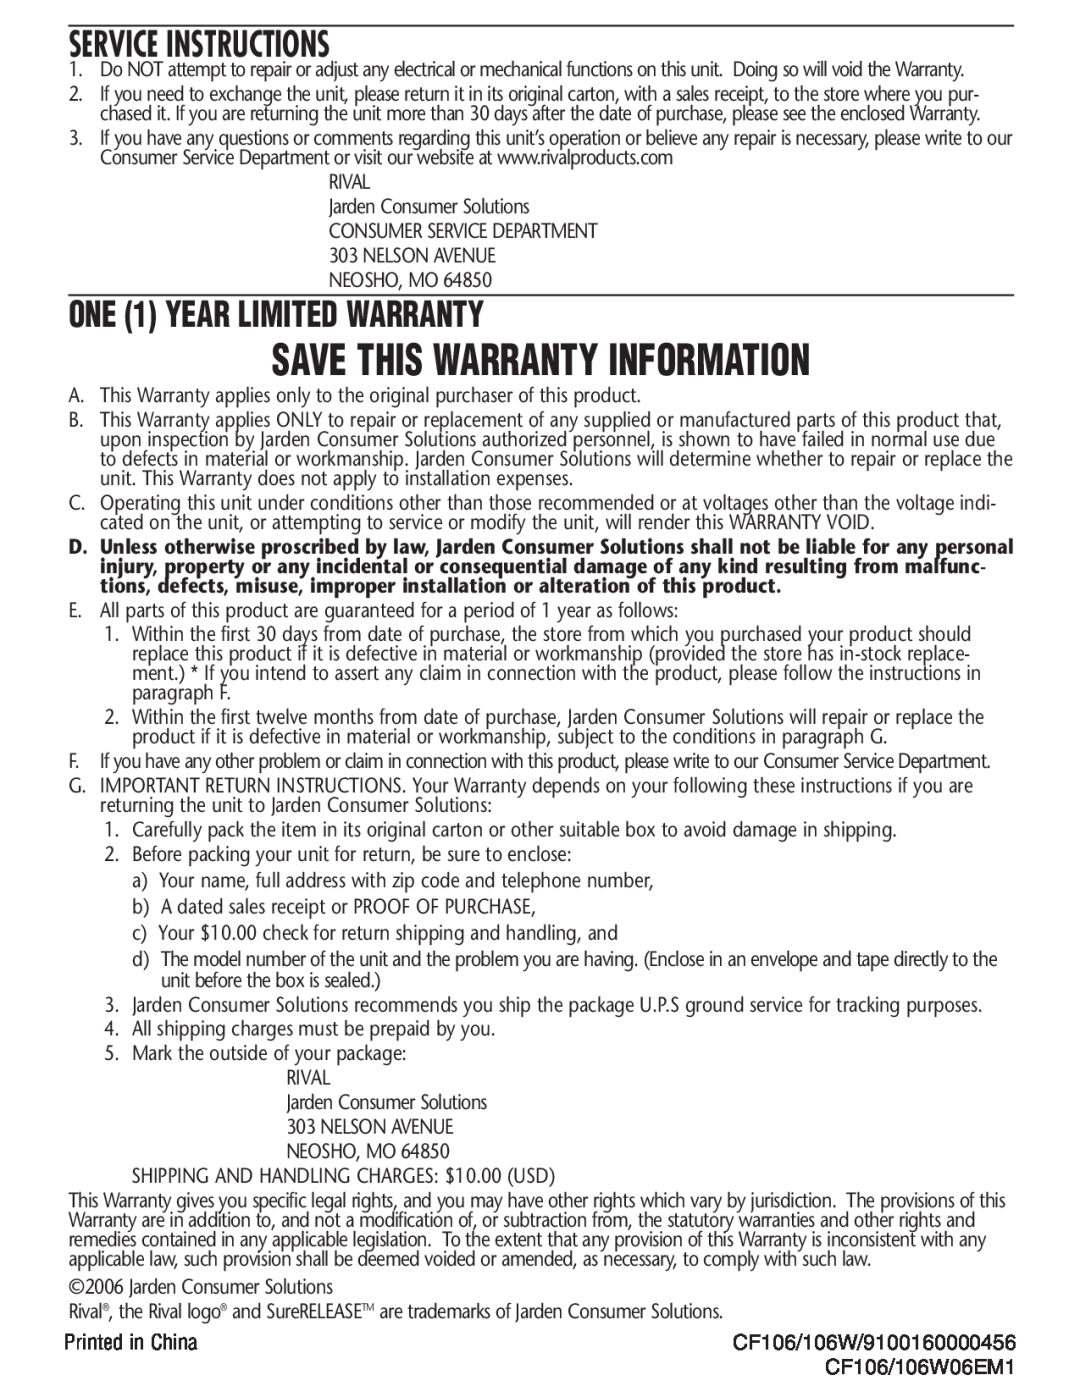 Rival CF106-W manual Service Instructions, ONE 1 YEAR LIMITED WARRANTY, Save This Warranty Information 